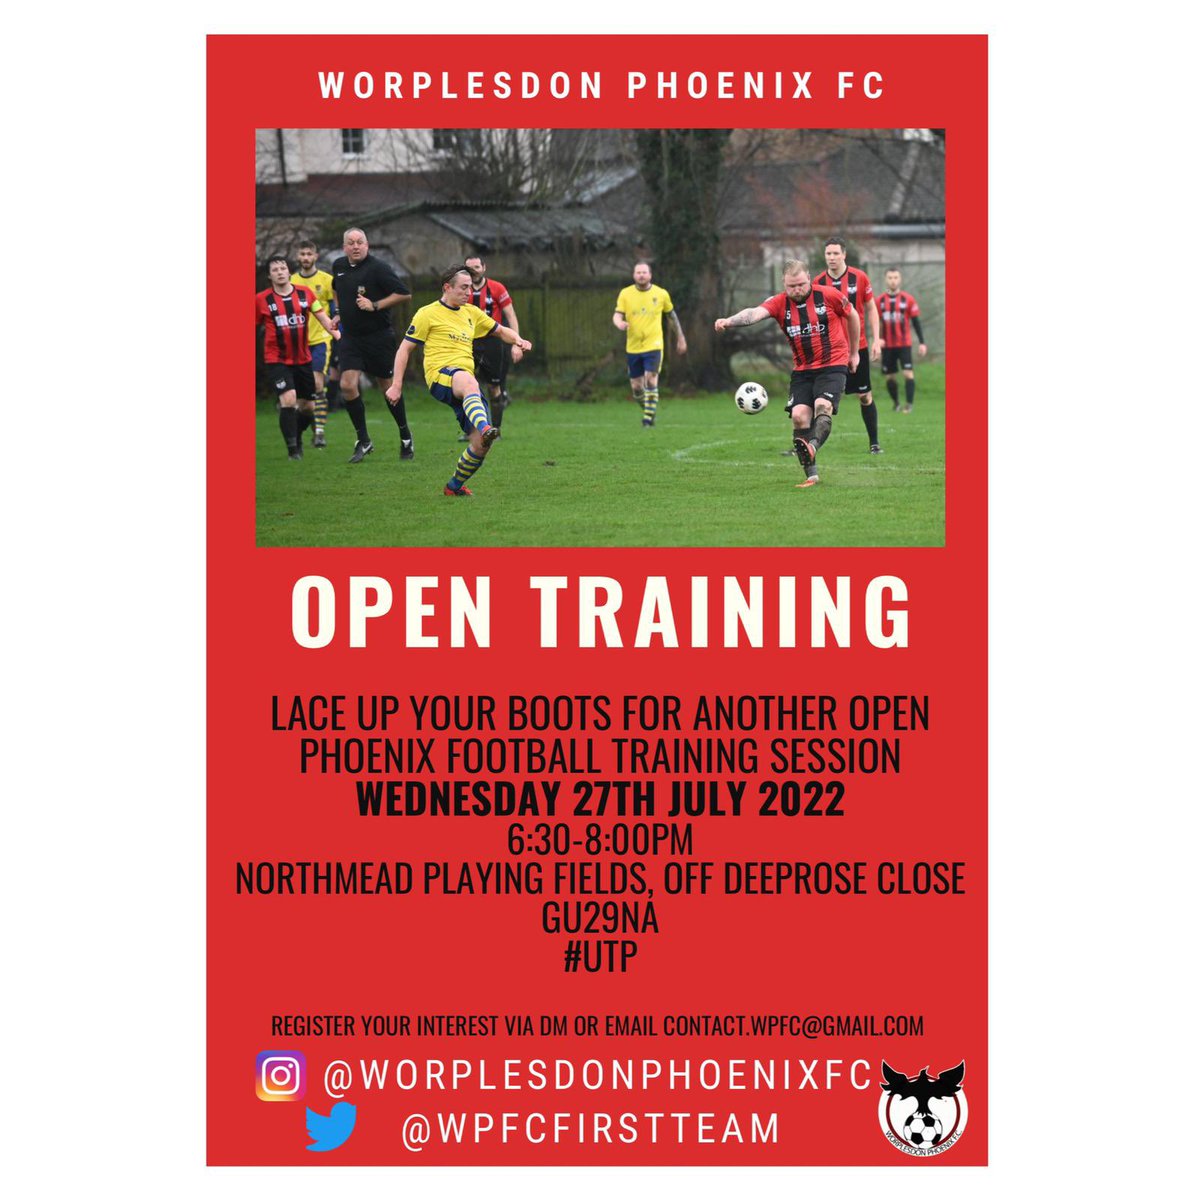 Pre season training not going as planned this is your chance to make a change!! Worplesdon Phoenix are offering an Open training session for all existing and potential new players. Feel free to DM us for more info and register your interest. 🔴⚫️🔵⚫️ #UTP